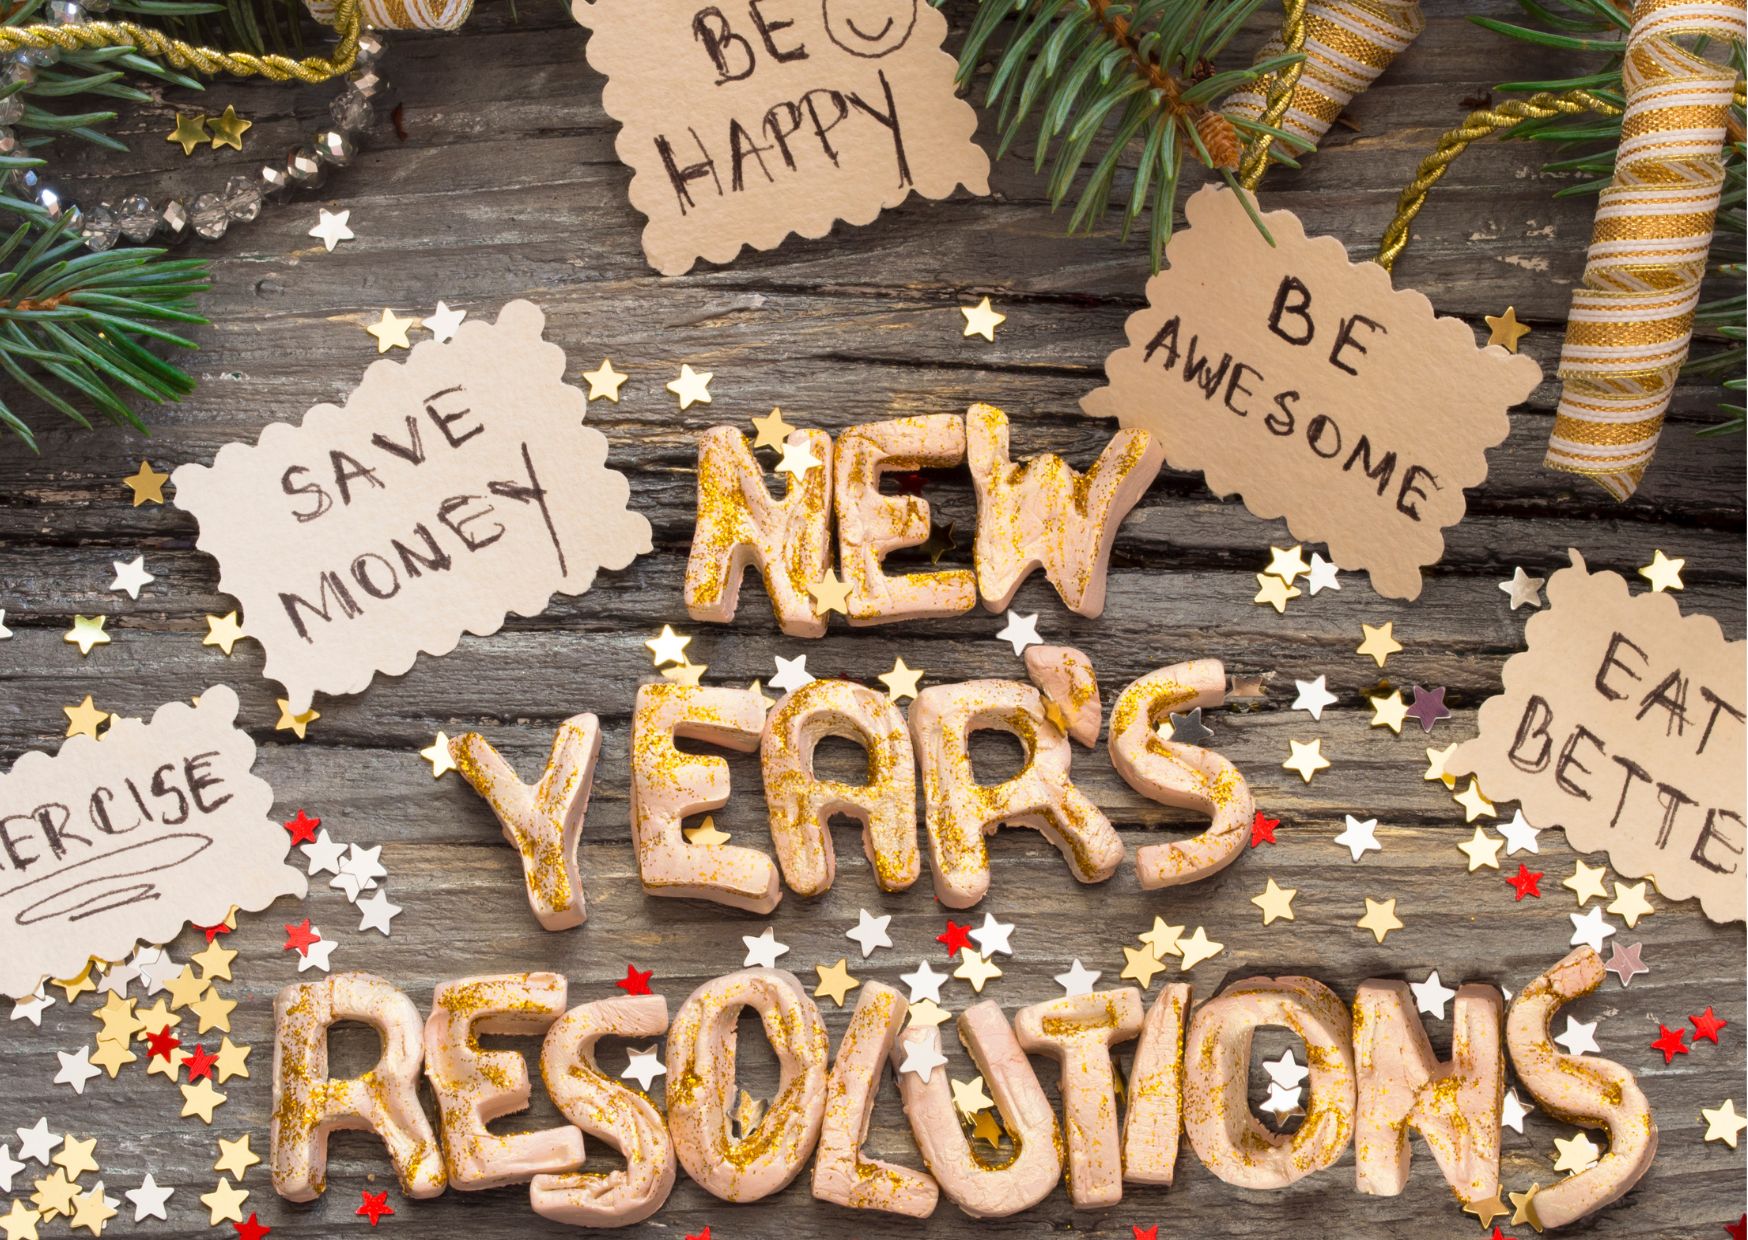 New Year’s resolutions and how to achieve them